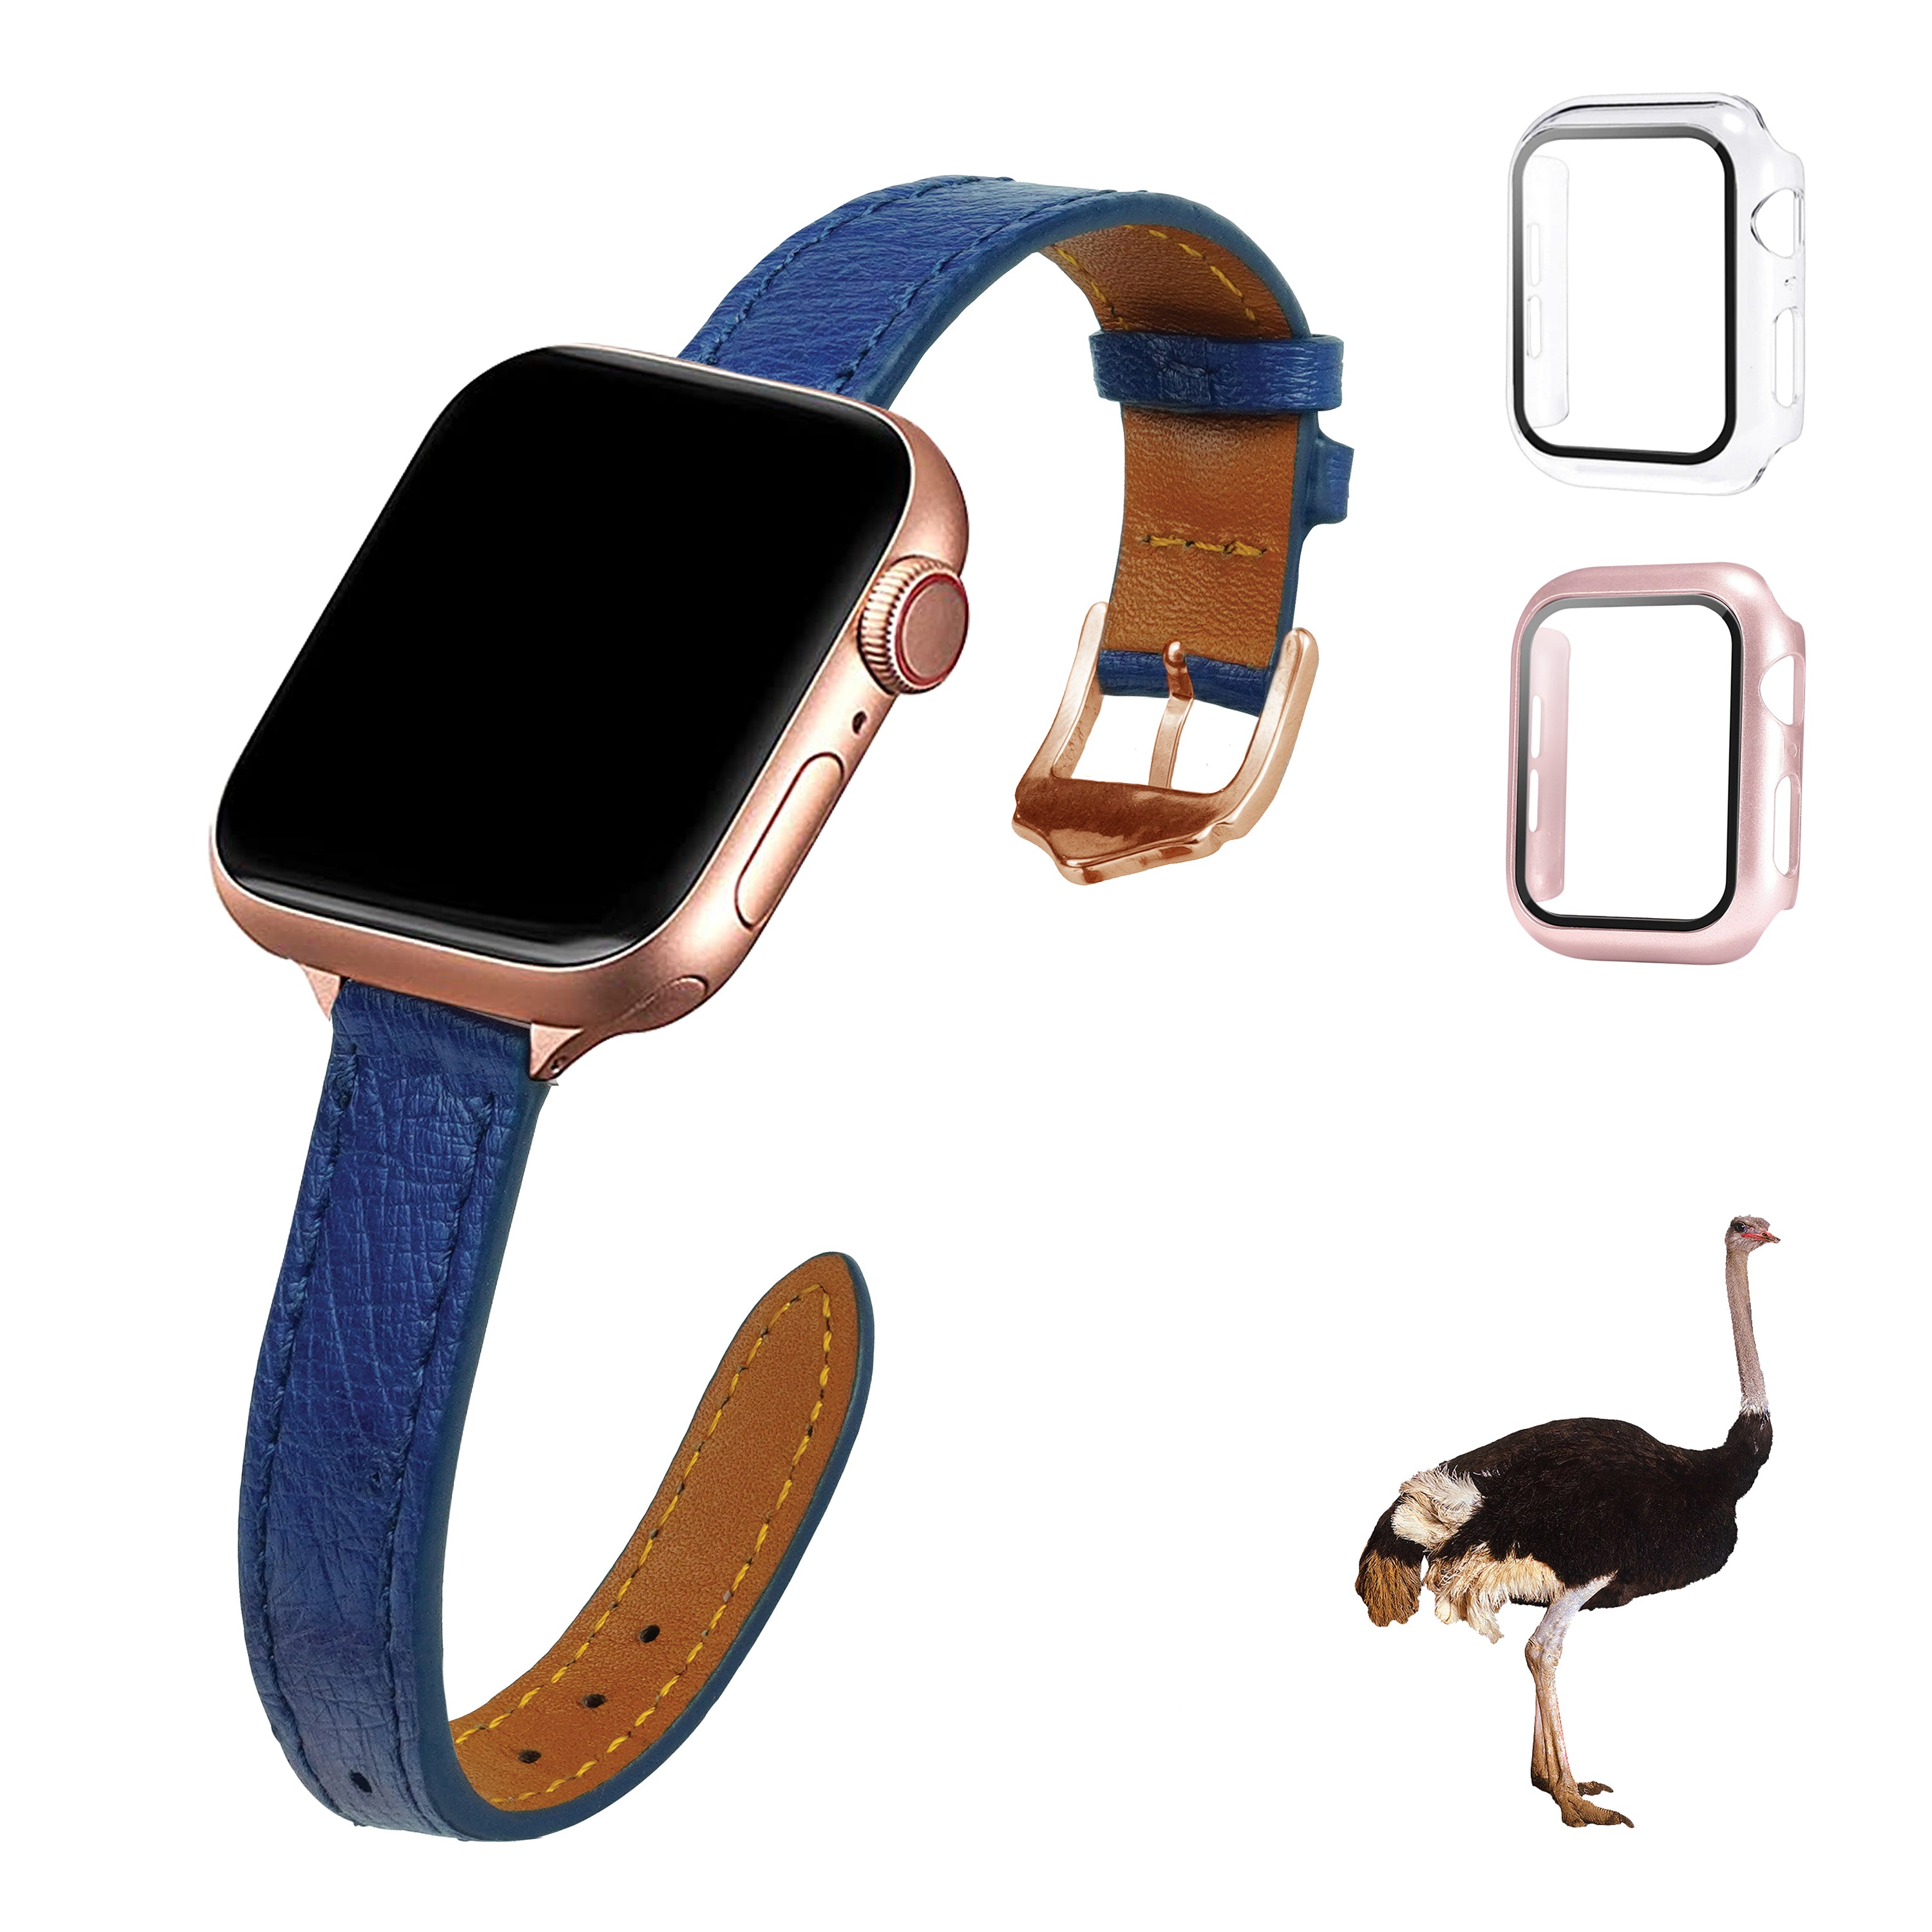 Blue Flat Ostrich Leather Band Compatible Apple Watch Iwatch 38mm Screen Protector Case Black Adapter Replacement Strap For Smartwatch Series 1 2 3 Leather Handmade AW-184G-W-38MM